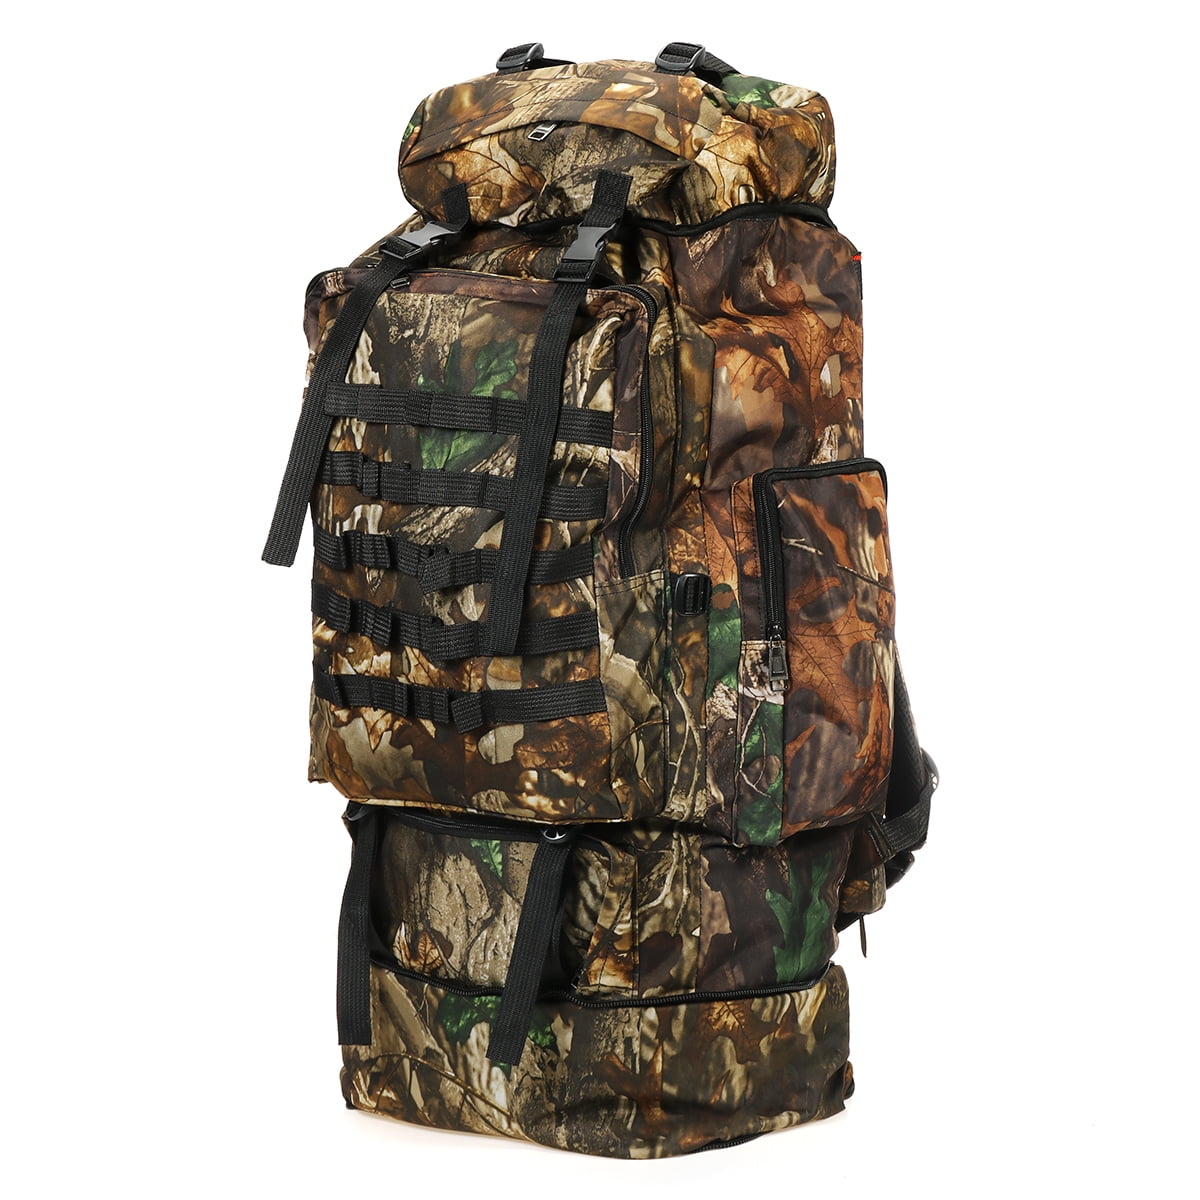 110L Camouflage Tactical Backpack Bag Outdoor Travel Hiking Climbing Militär 